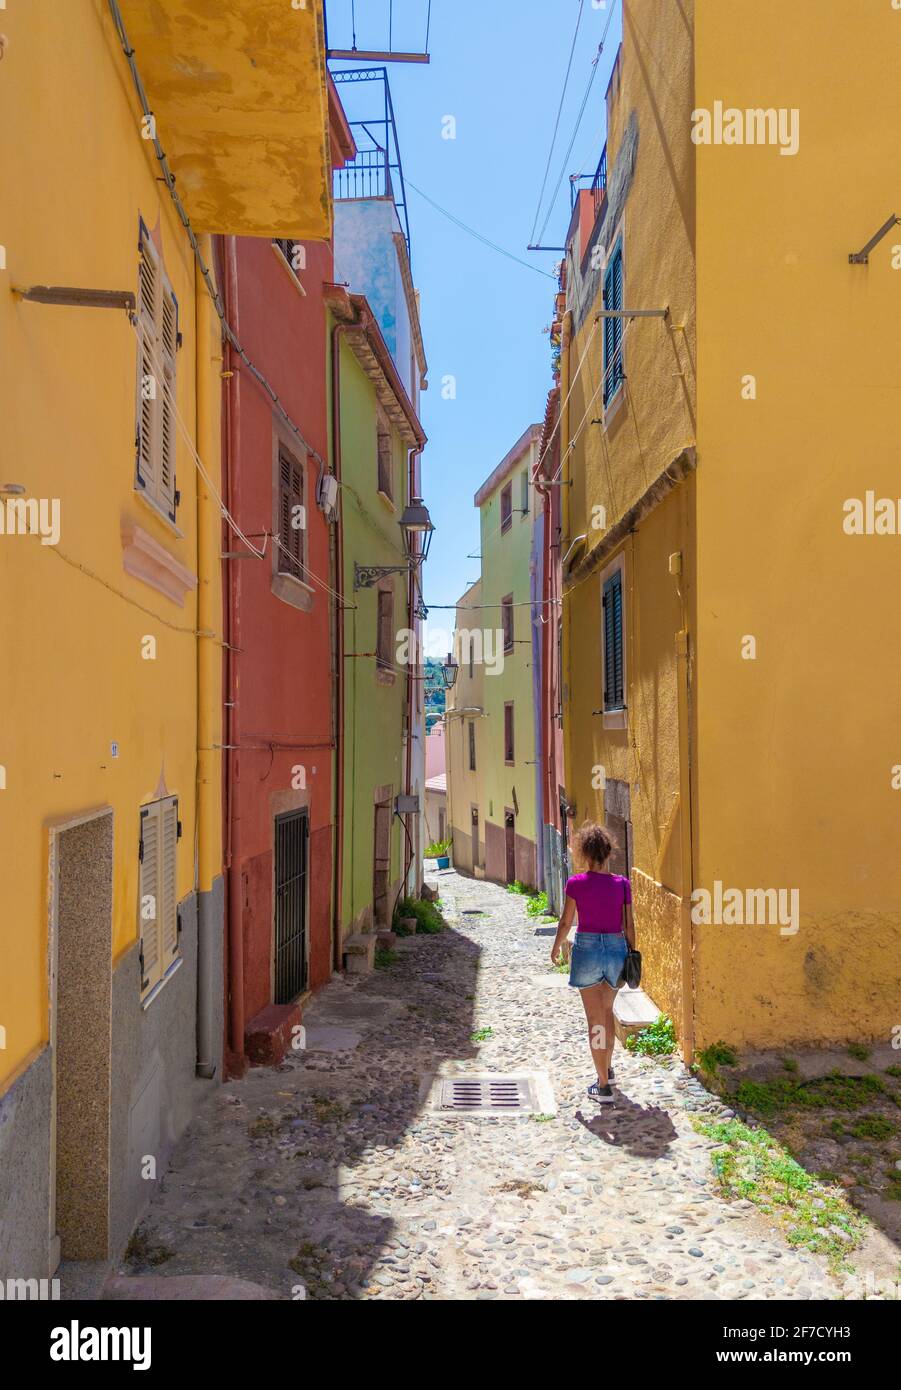 Bosa (Sardinia, Italy) - A view of the touristic and charming colorful old town in the marine coast of Oristano, one of the most beautiful on Sardegna Stock Photo